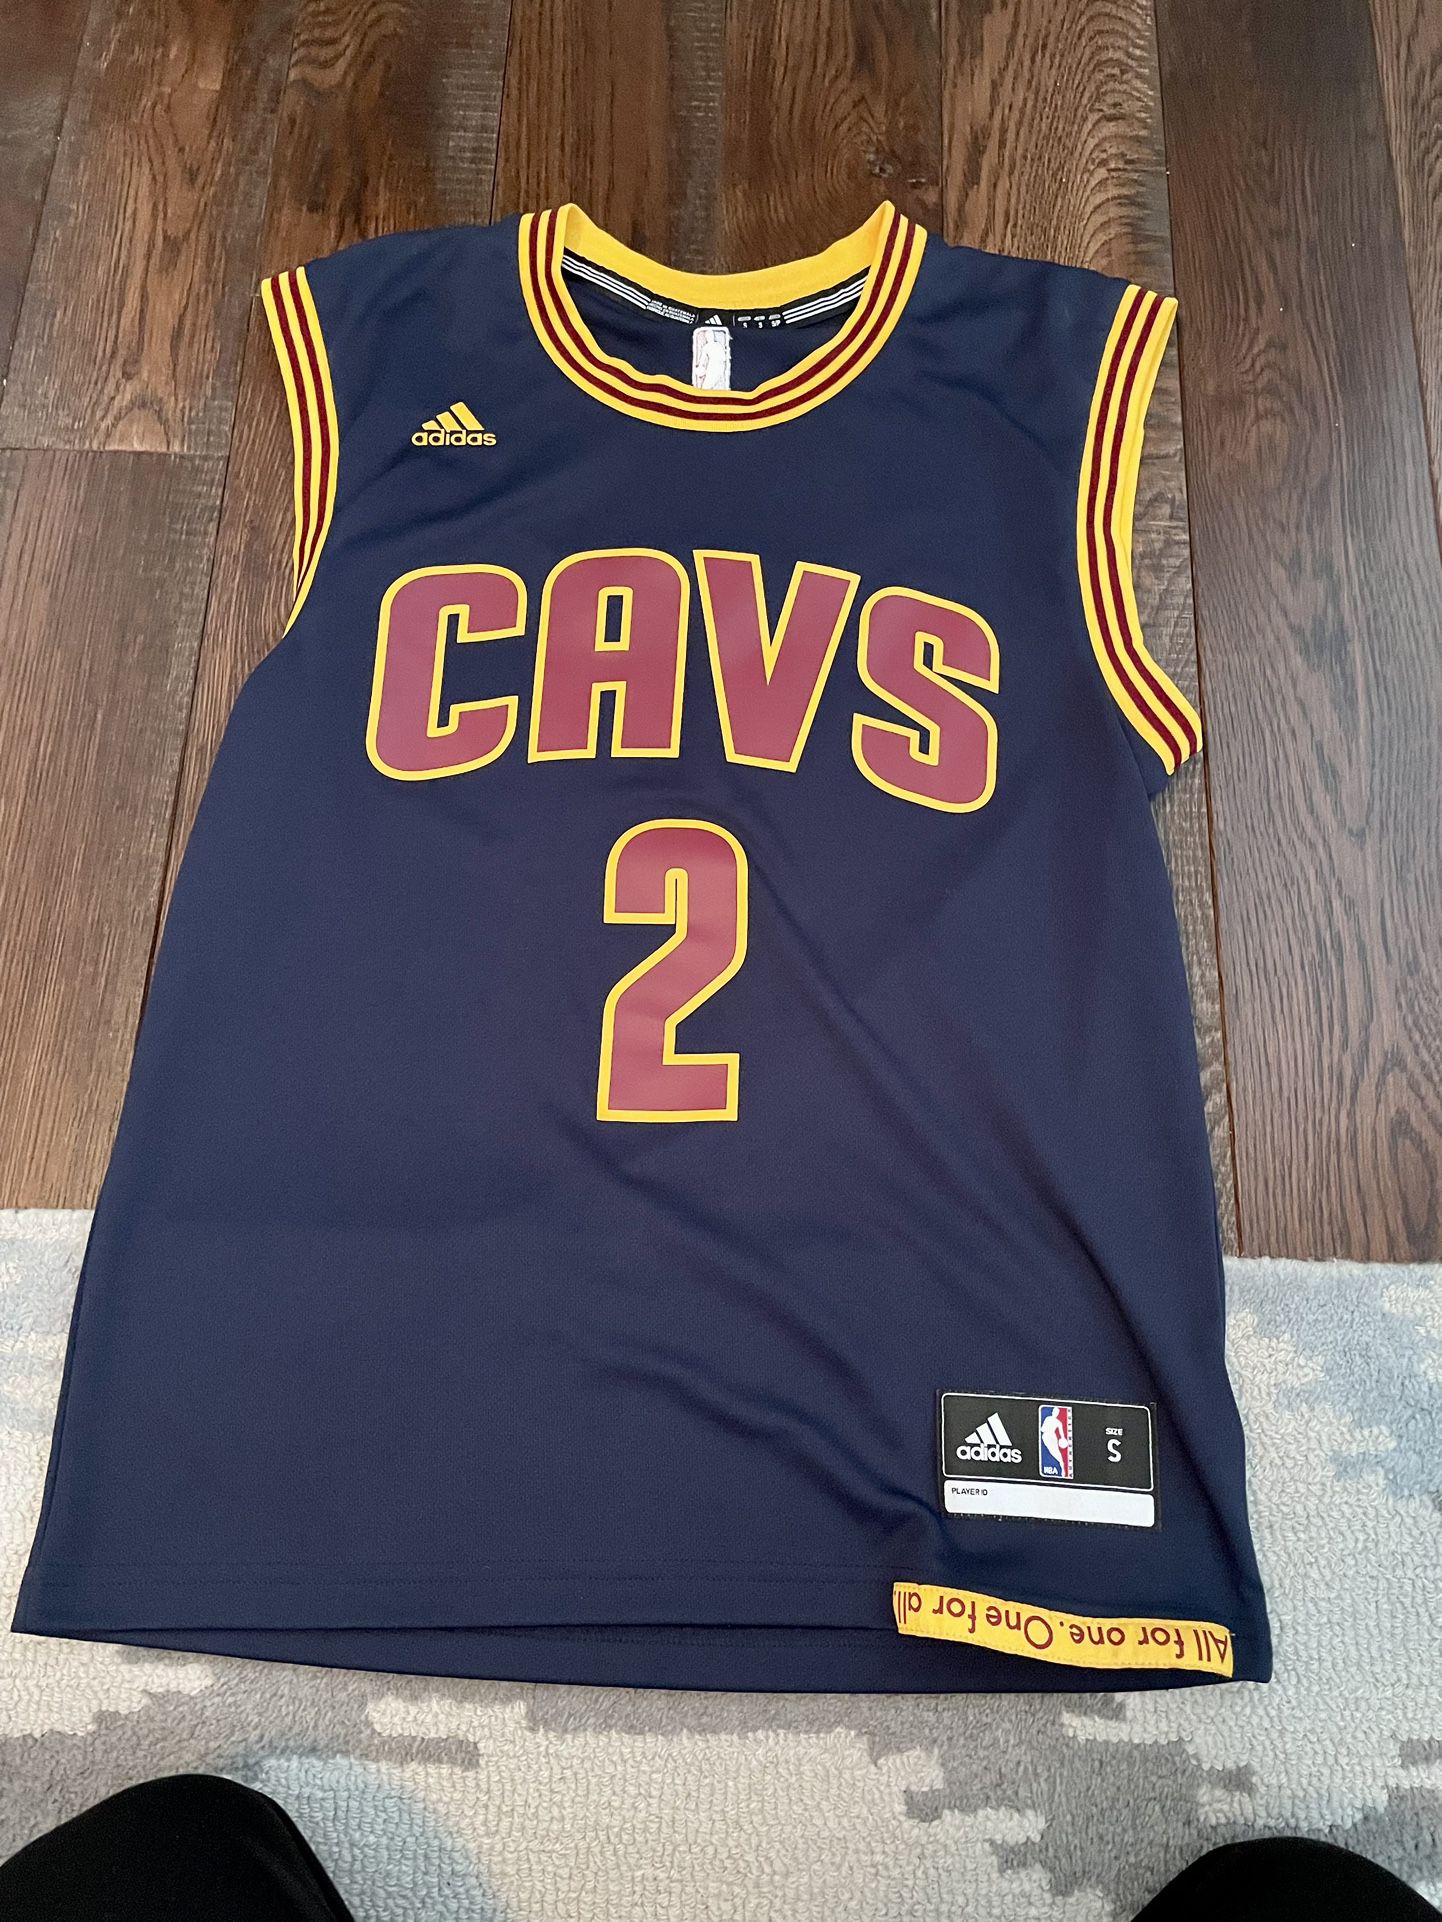 adidas, Shirts & Tops, Kyrie Irving Cavs Jersey